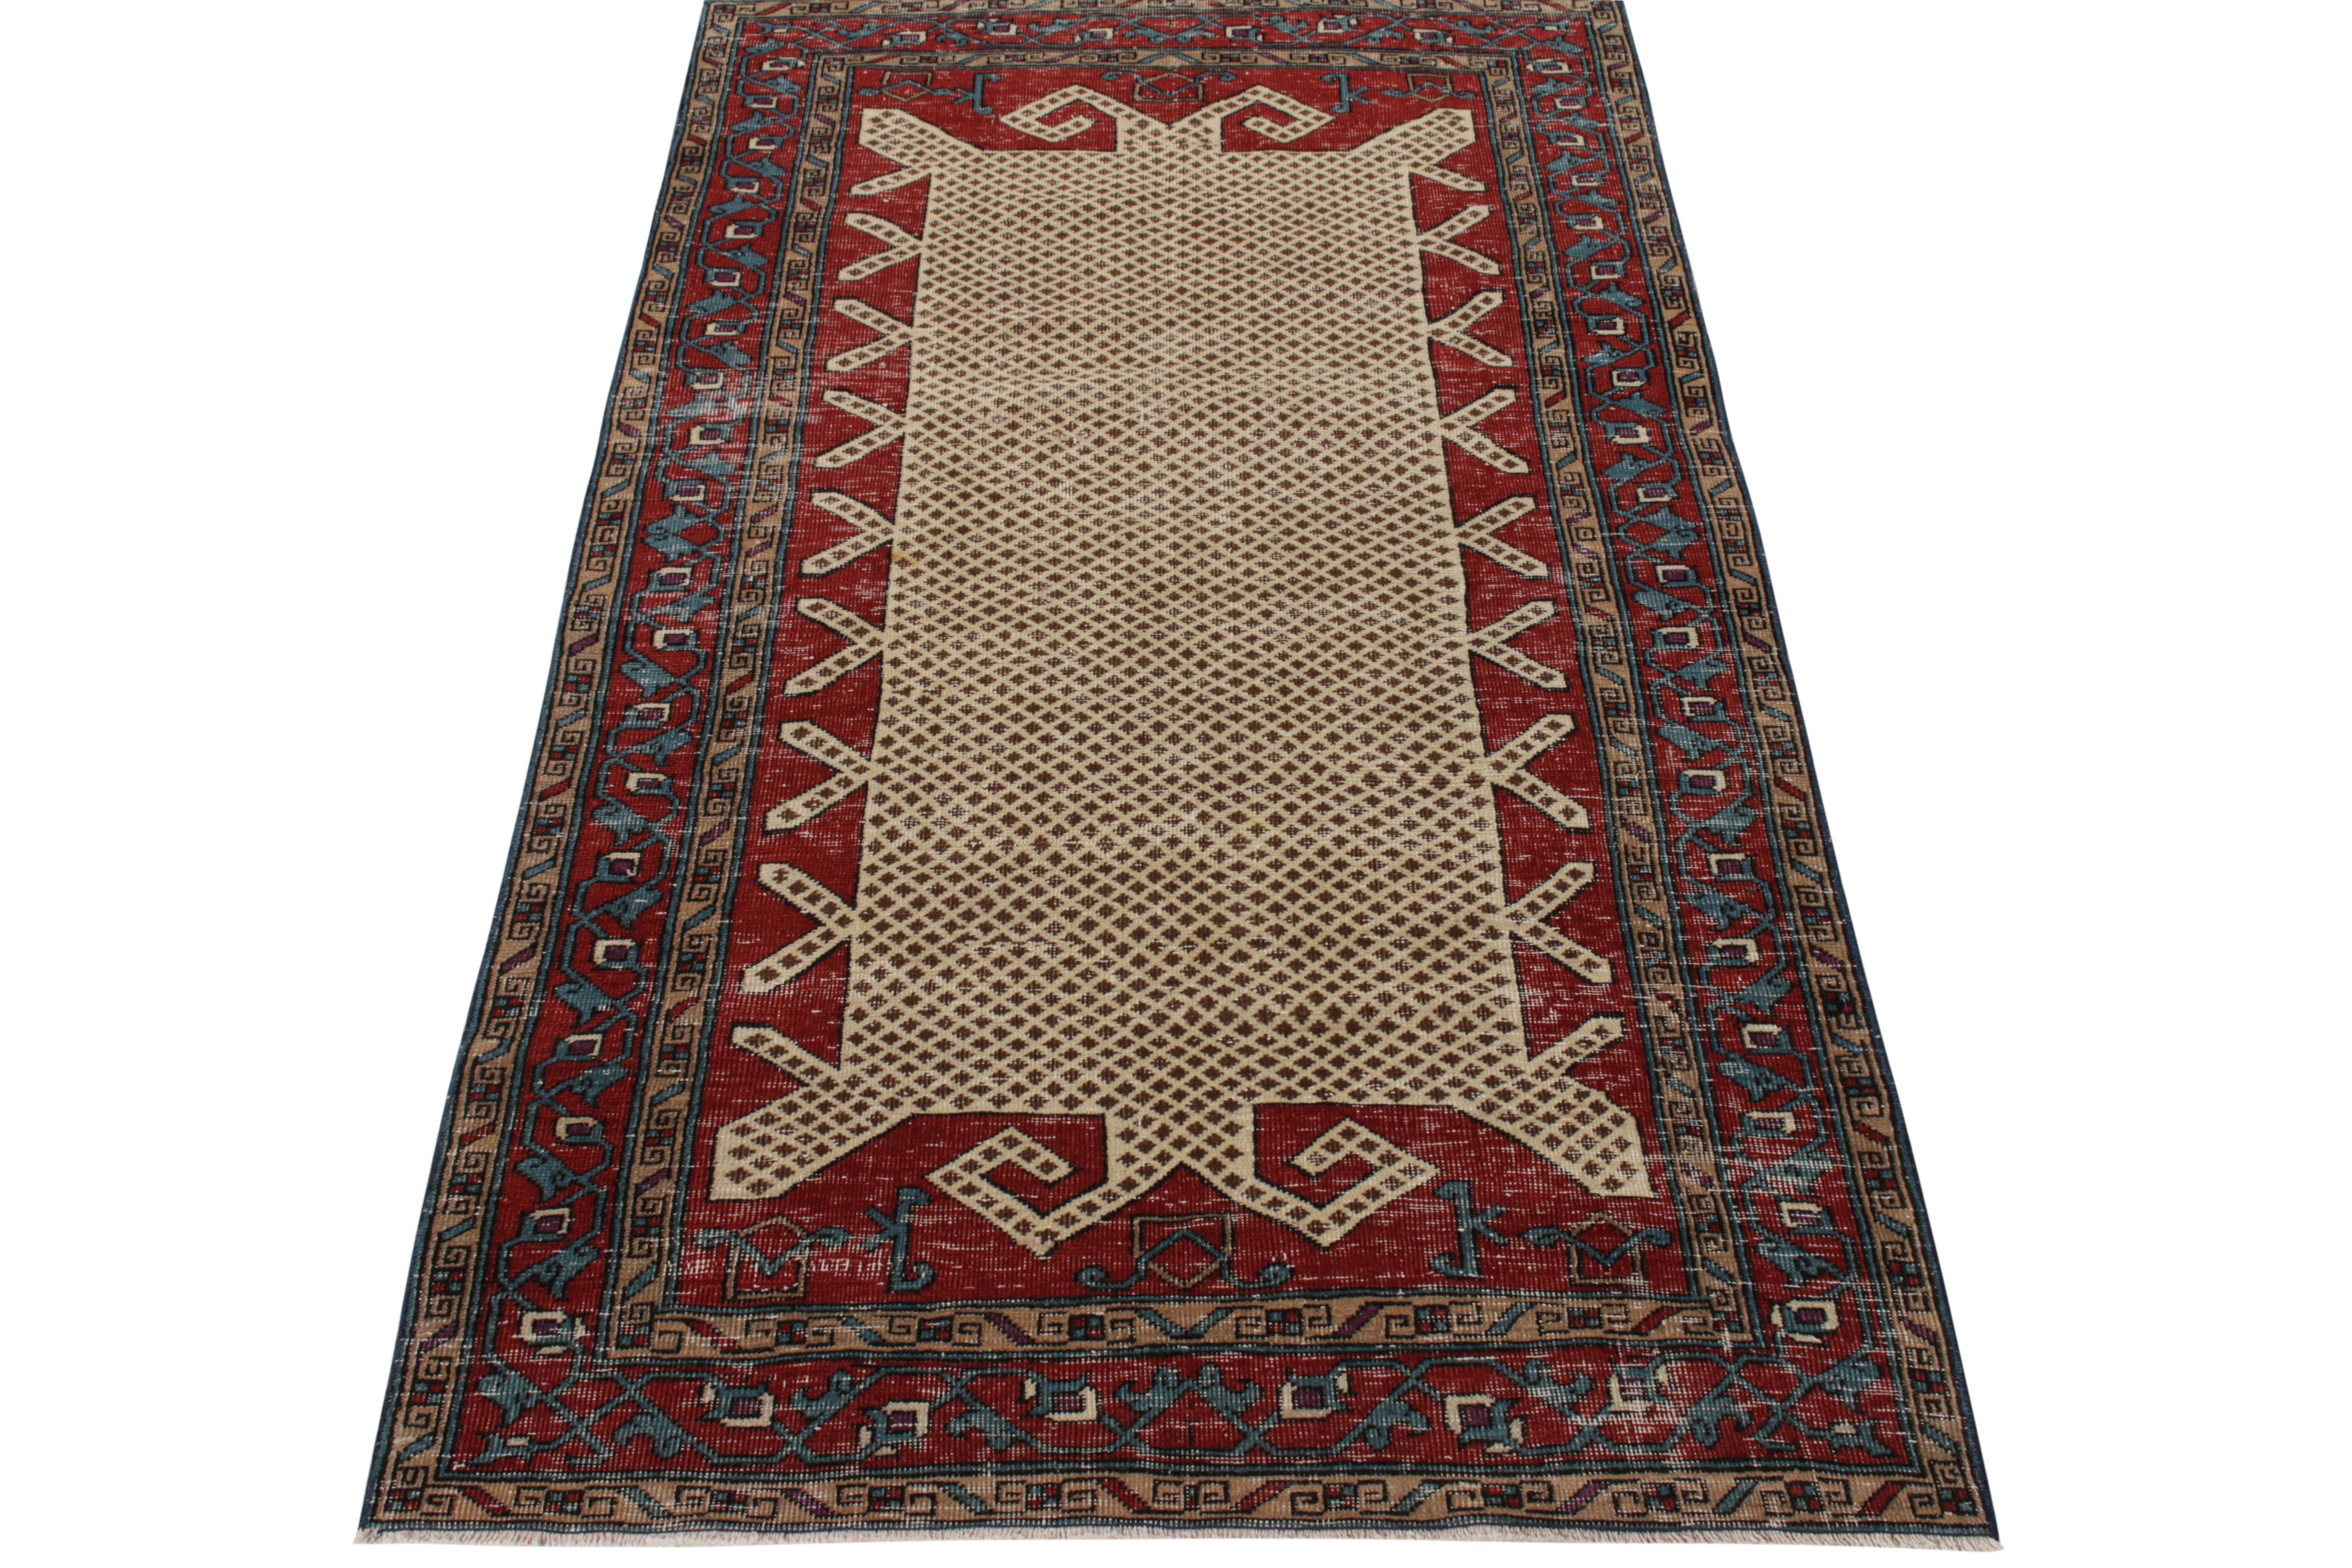 Originating from Turkey circa 1960-1970, an 4x8 vintage mid-century rug featuring a gorgeous geometric pattern in deep tones of maroon and bottle blue juxtaposed by beige-brown; impeccably complementing Anatolian Turkish motifs on the scale. From